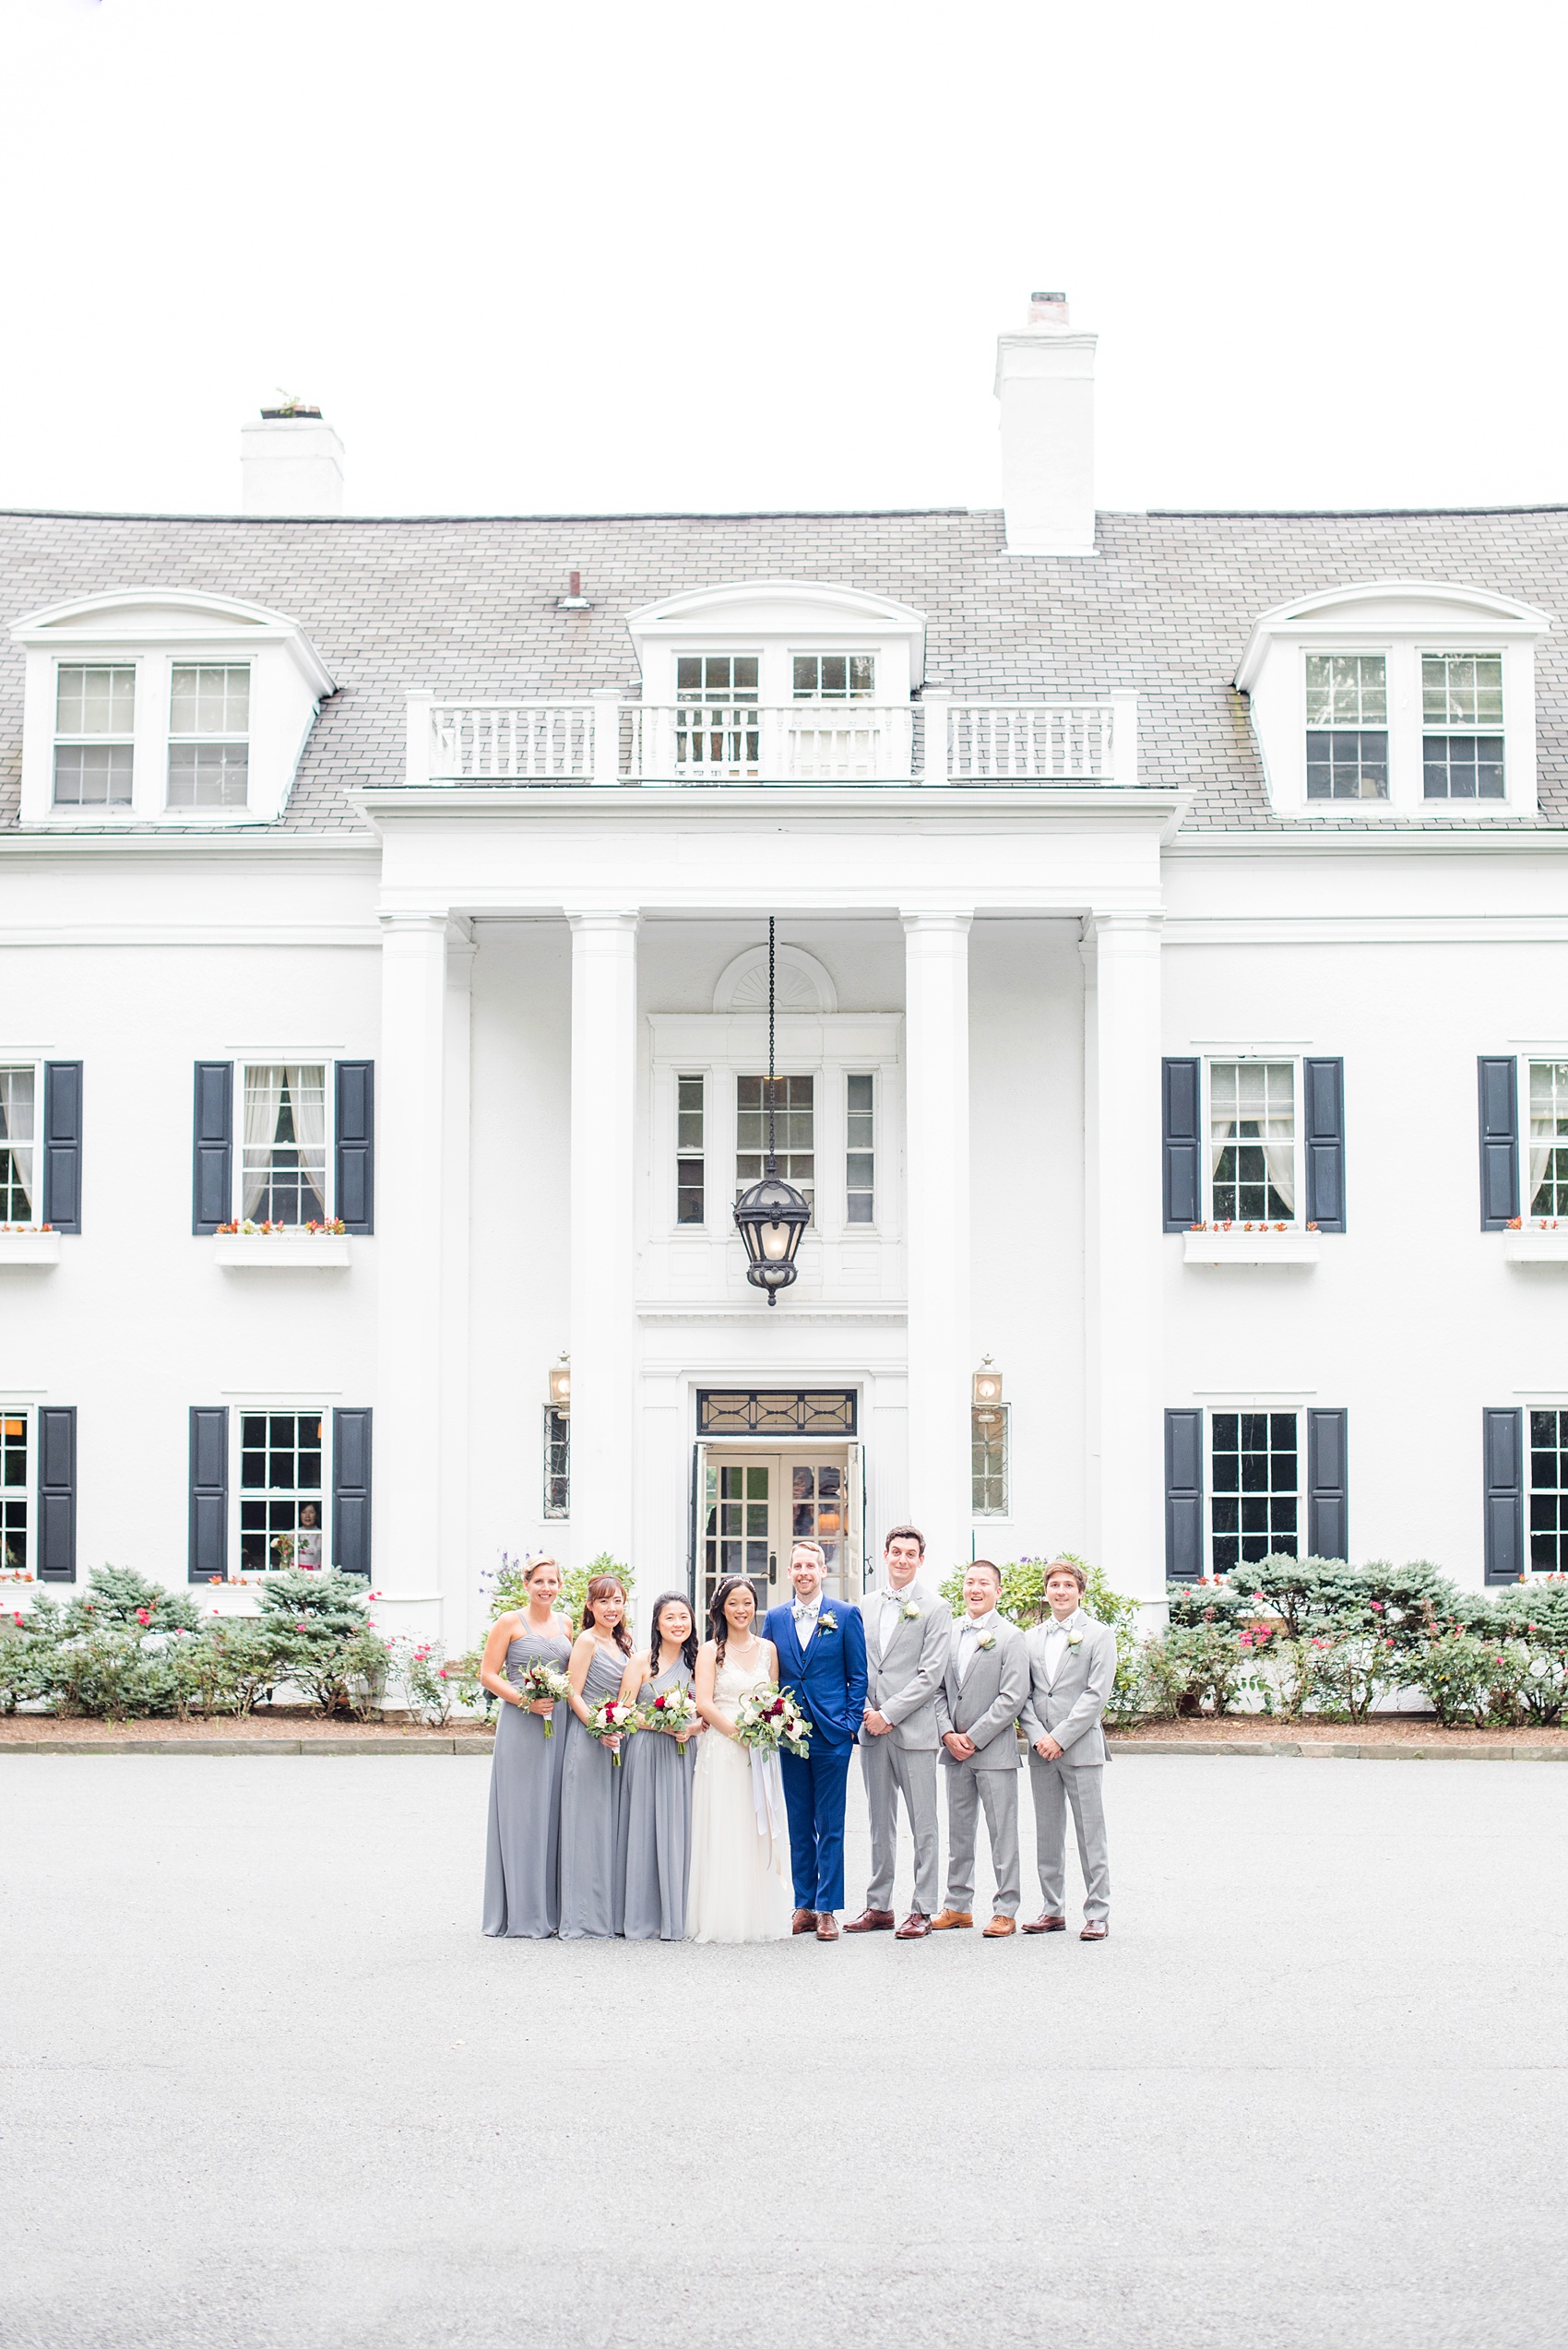 Wedding photos at Crabtree's Kittle House in Chappaqua, New York by Mikkel Paige Photography. This venue in Westchester county was the perfect place to capture their creative Vogue-like bridal party photo, with the bridesmaids in grey gowns and men in grey suits with matching pattern bow ties. The historic home is very close to NYC. Click through for more summer wedding inspiration from their day! #bluesuit #BHLDNgown #mikkelpaige #CrabtreesKittleHouse #WestchesterWeddingVenues #WestchesterWedding #AsianBride #summerwedding #brideandgroom #weddingparty #bridalparty #vogueweddingphotos